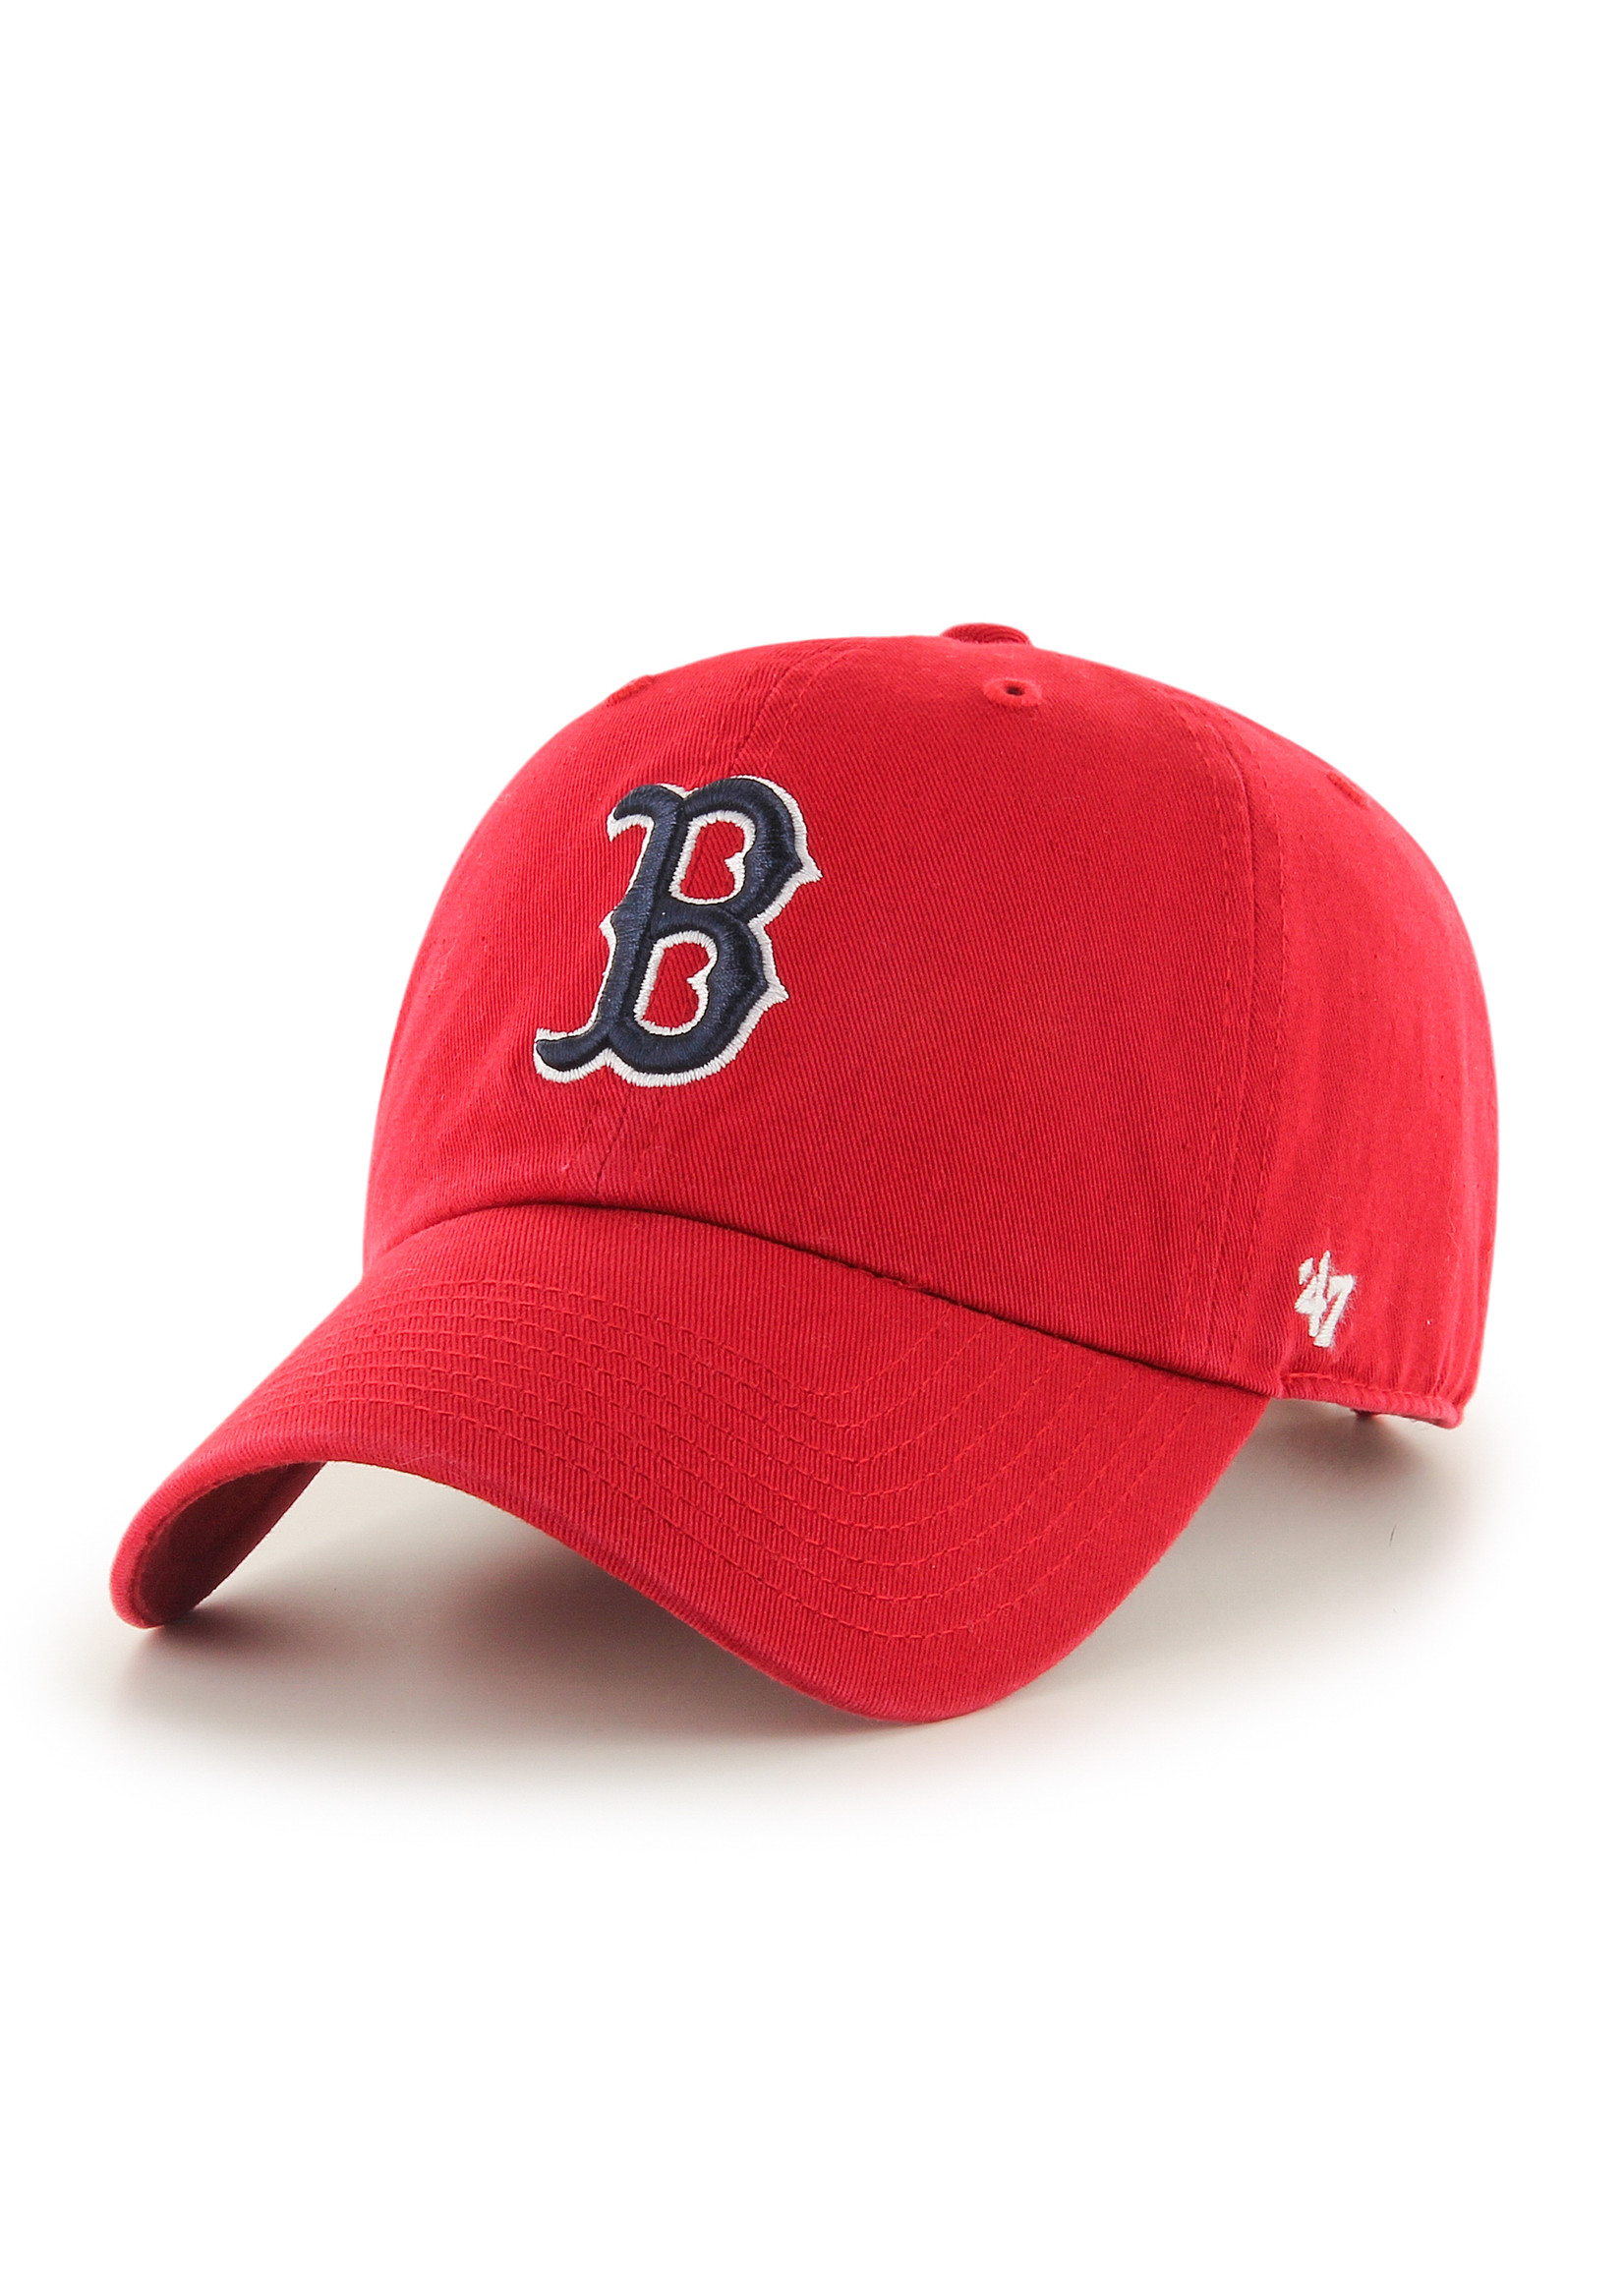 '47 Brand Boston Red Sox "B" Clean Up Hat Red/Navy/White Adjustable Men